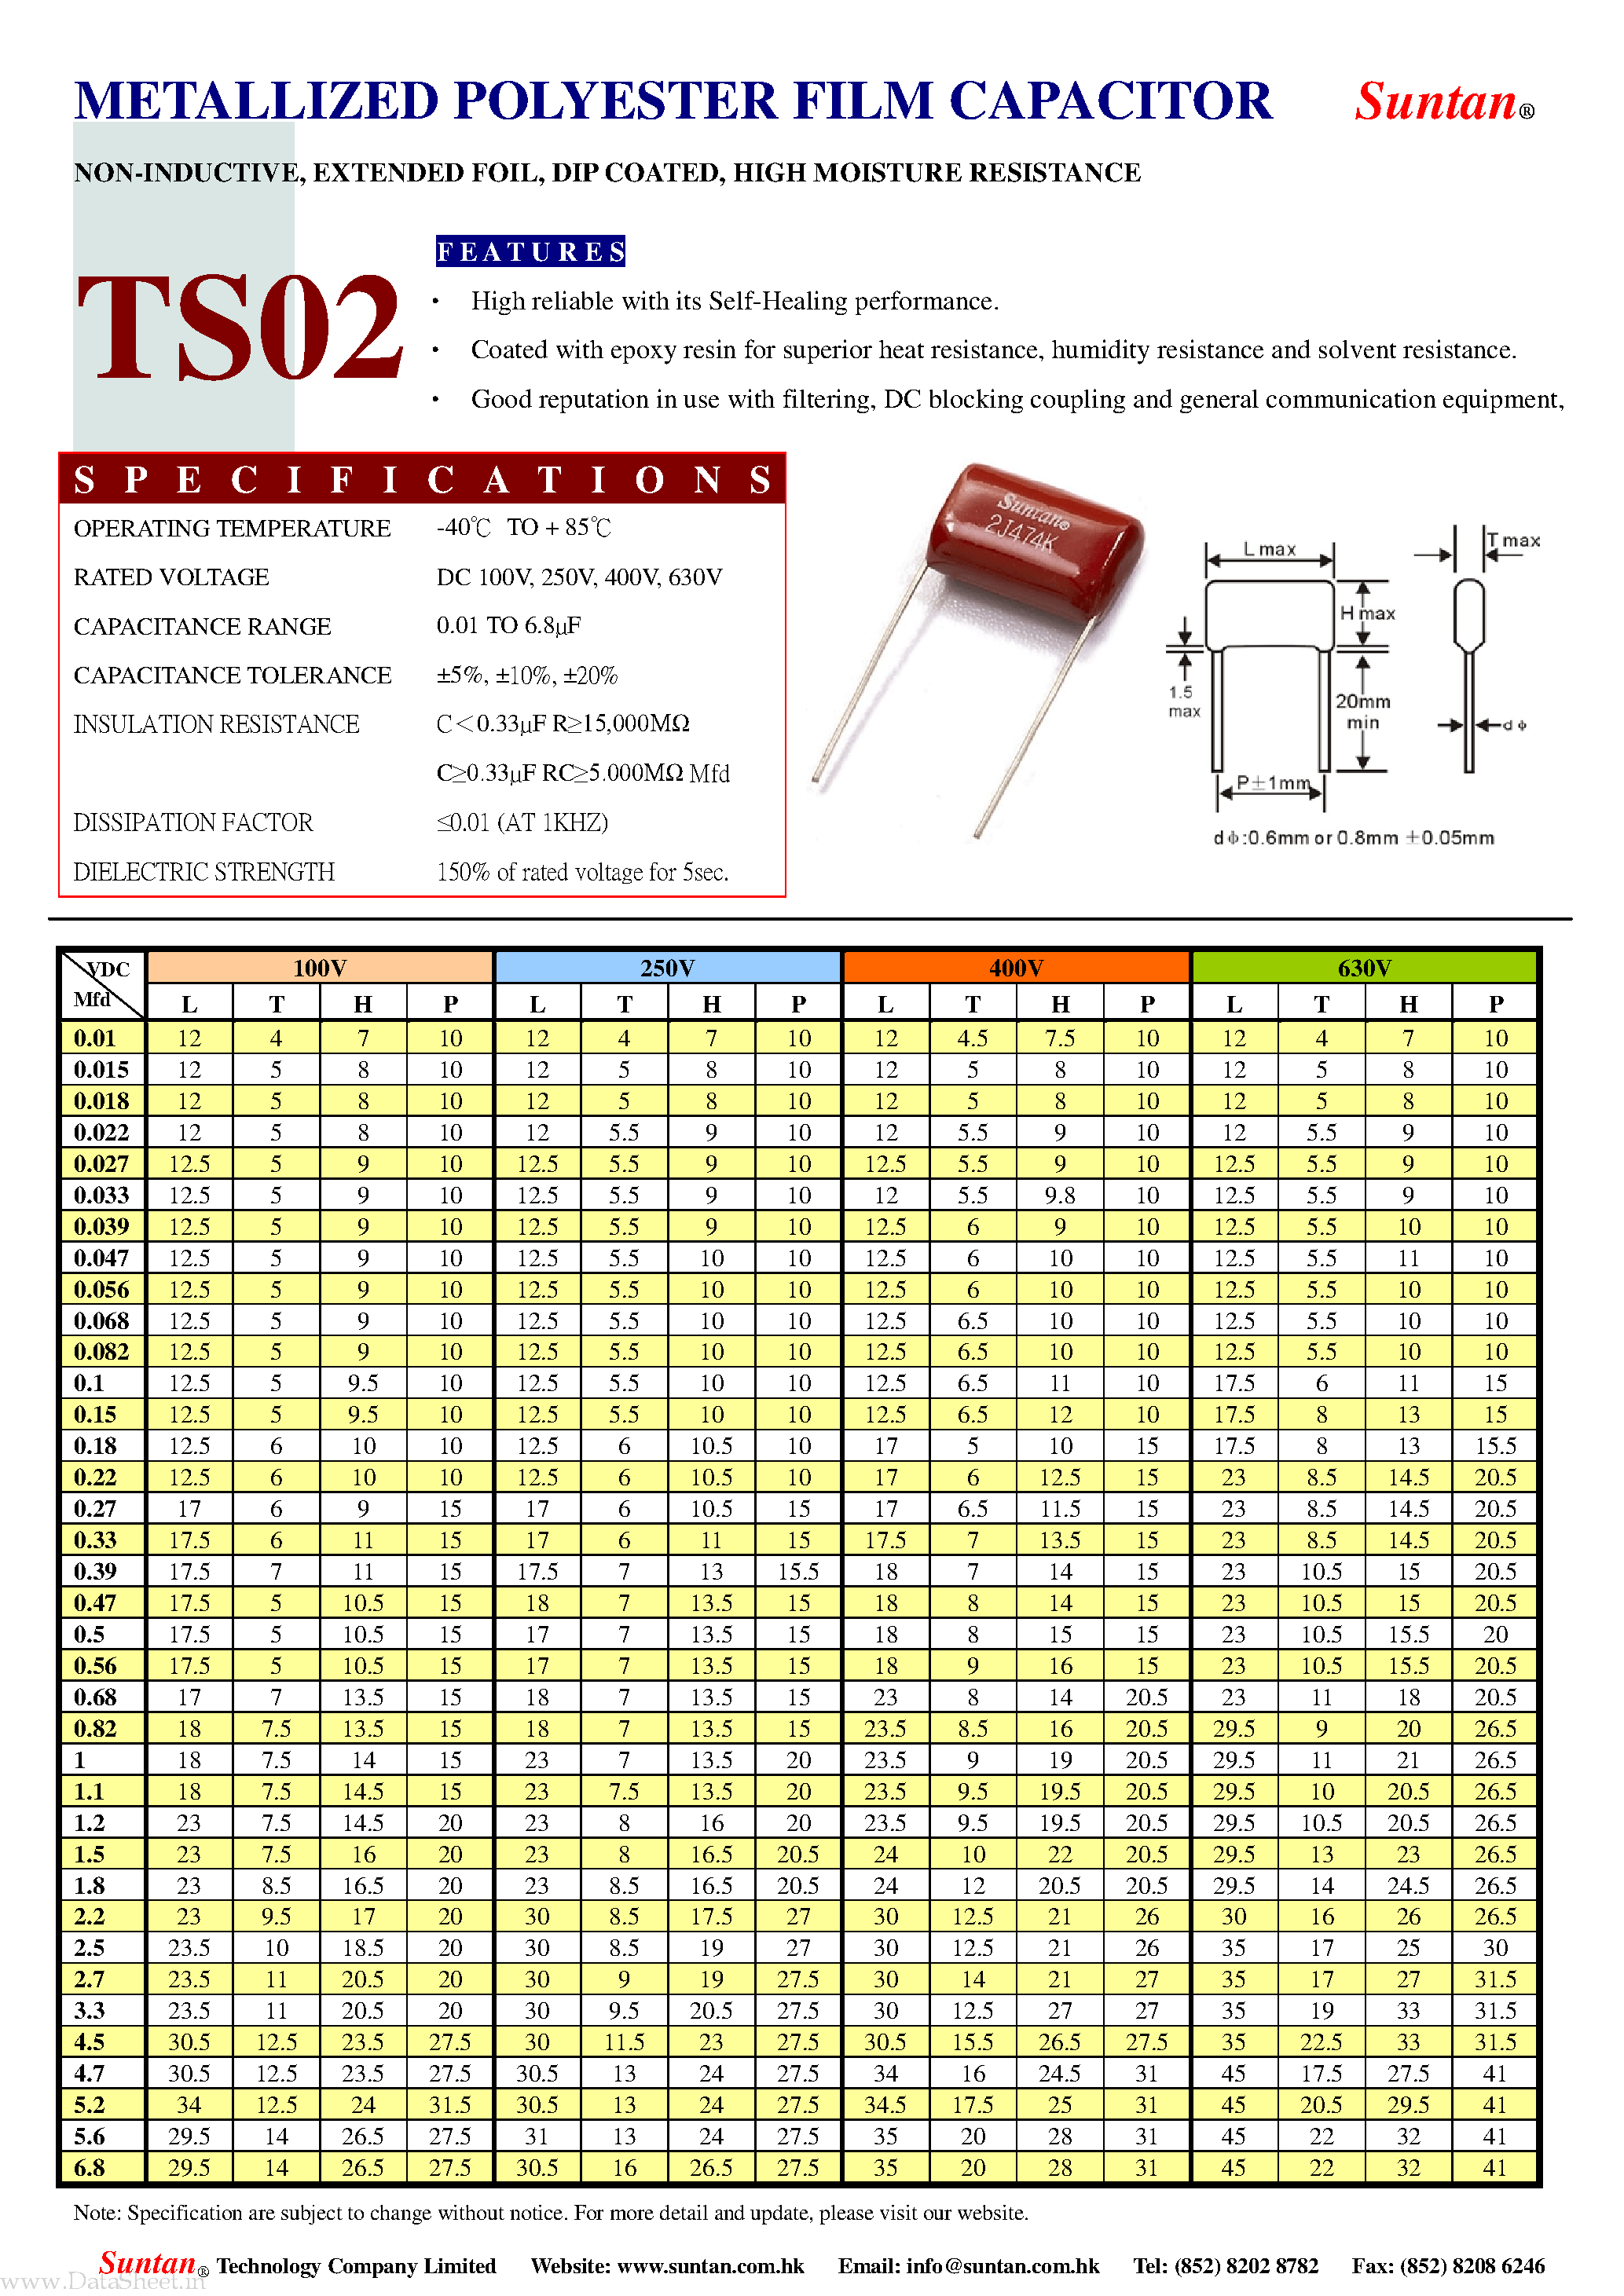 Datasheet TS02 - METALLIZED POLYESTER FILM CAPACITOR page 1